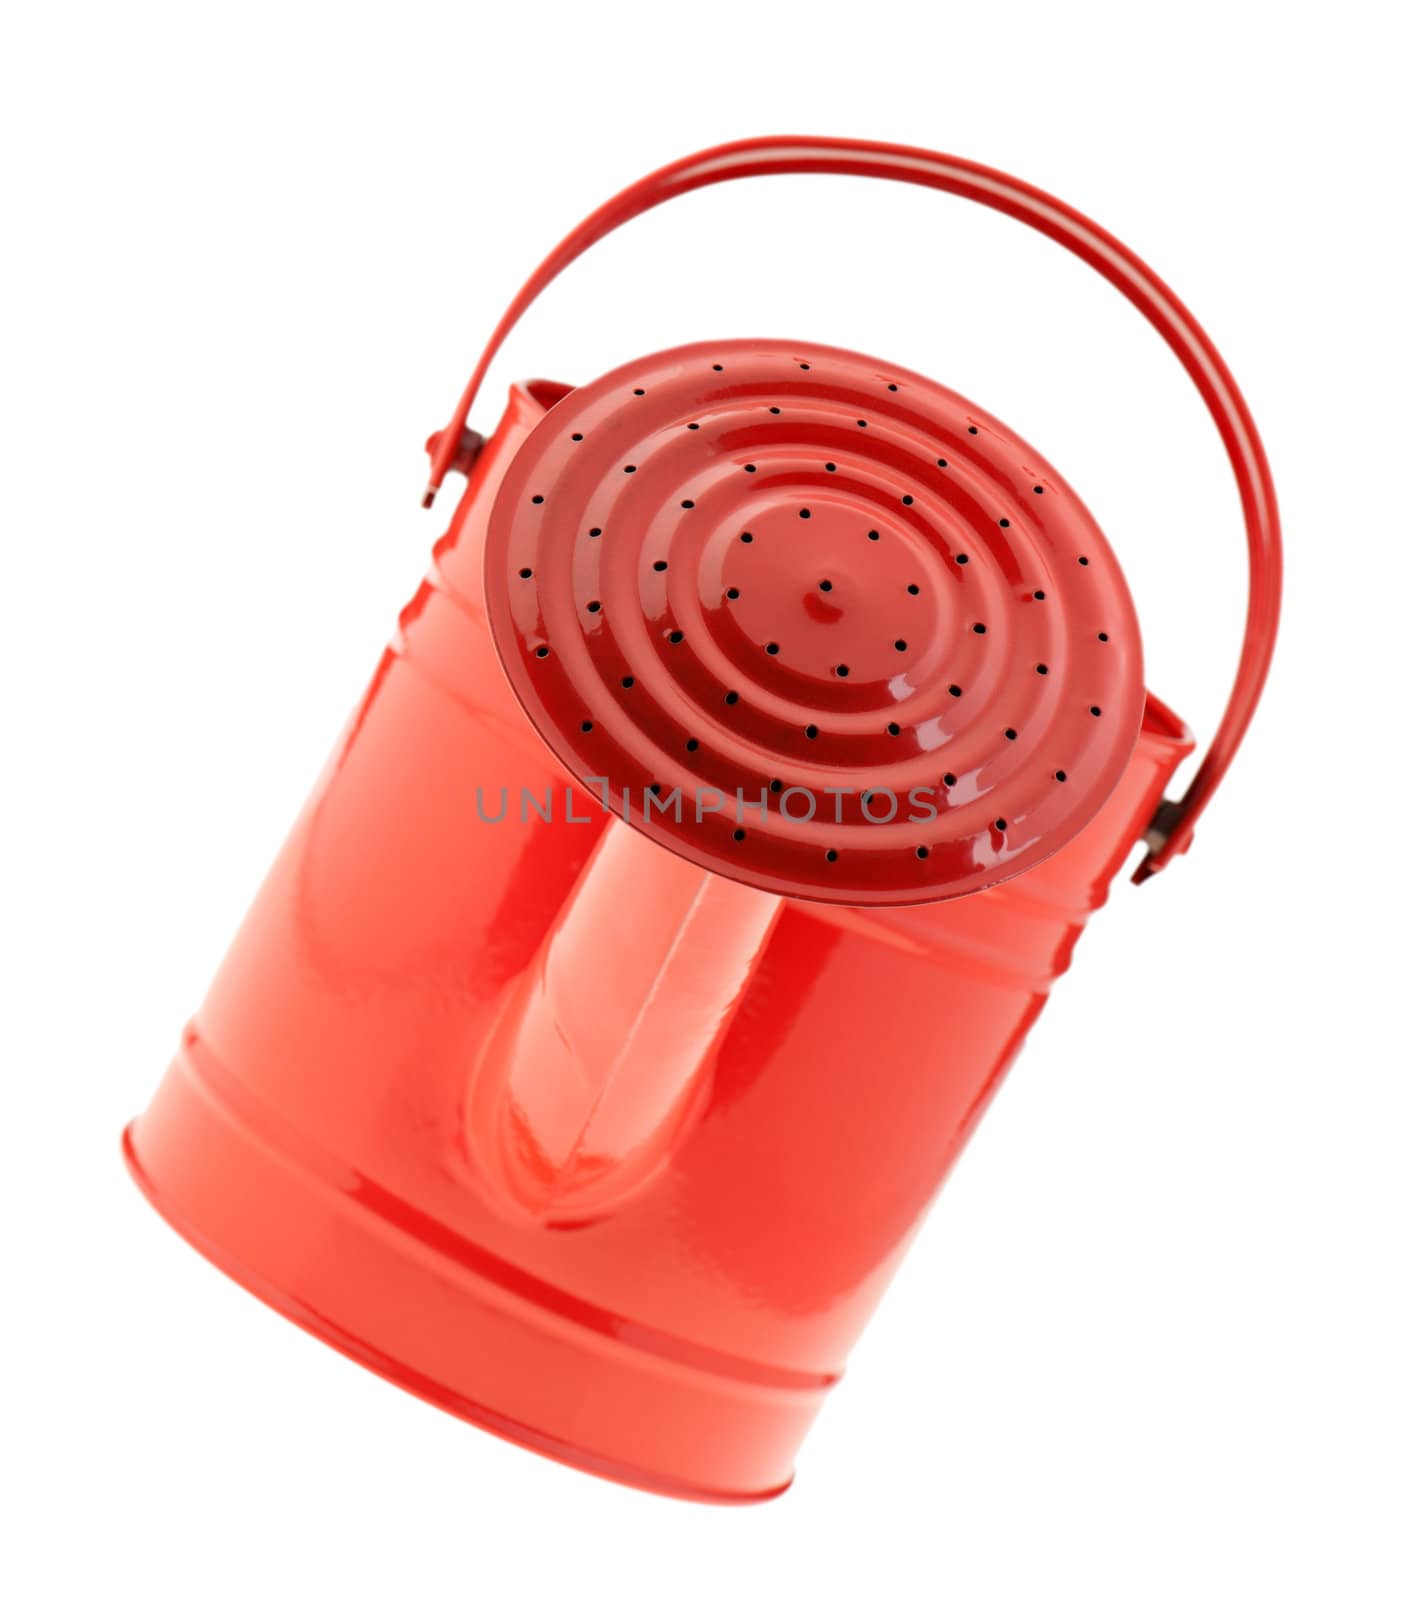 Red watering can by galdzer